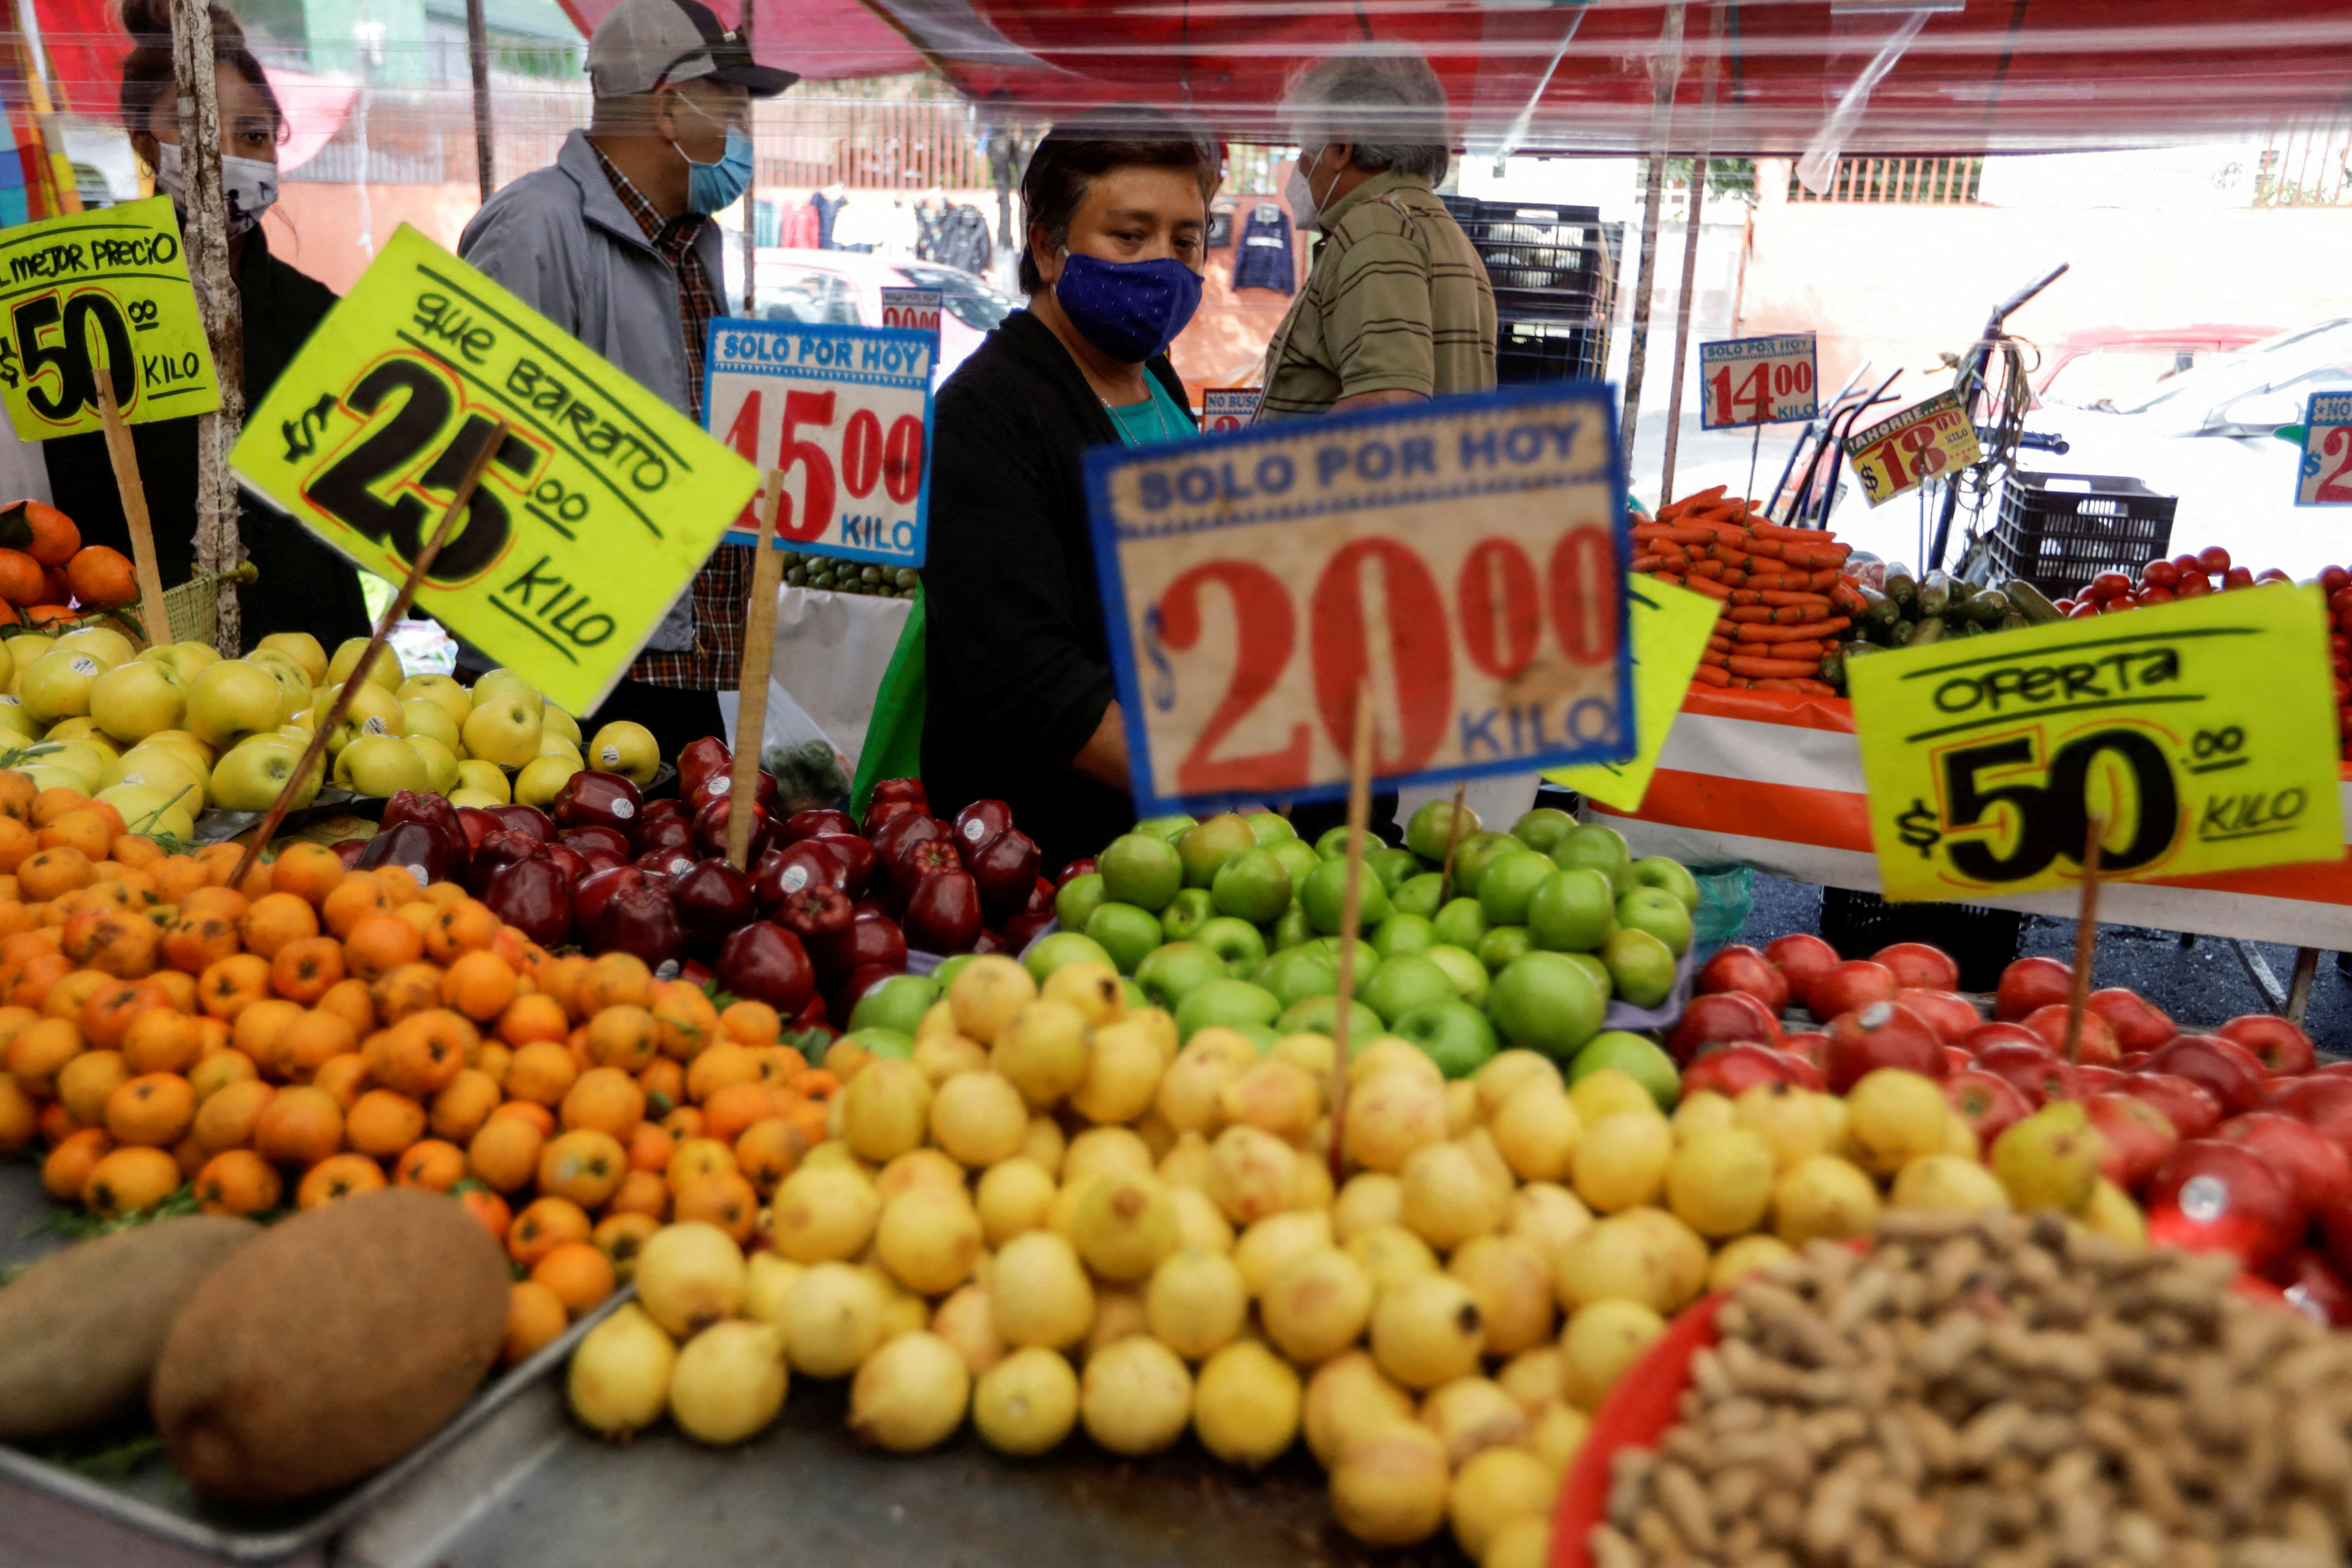 Customers walk past a fruit stall at a street market, in Mexico City